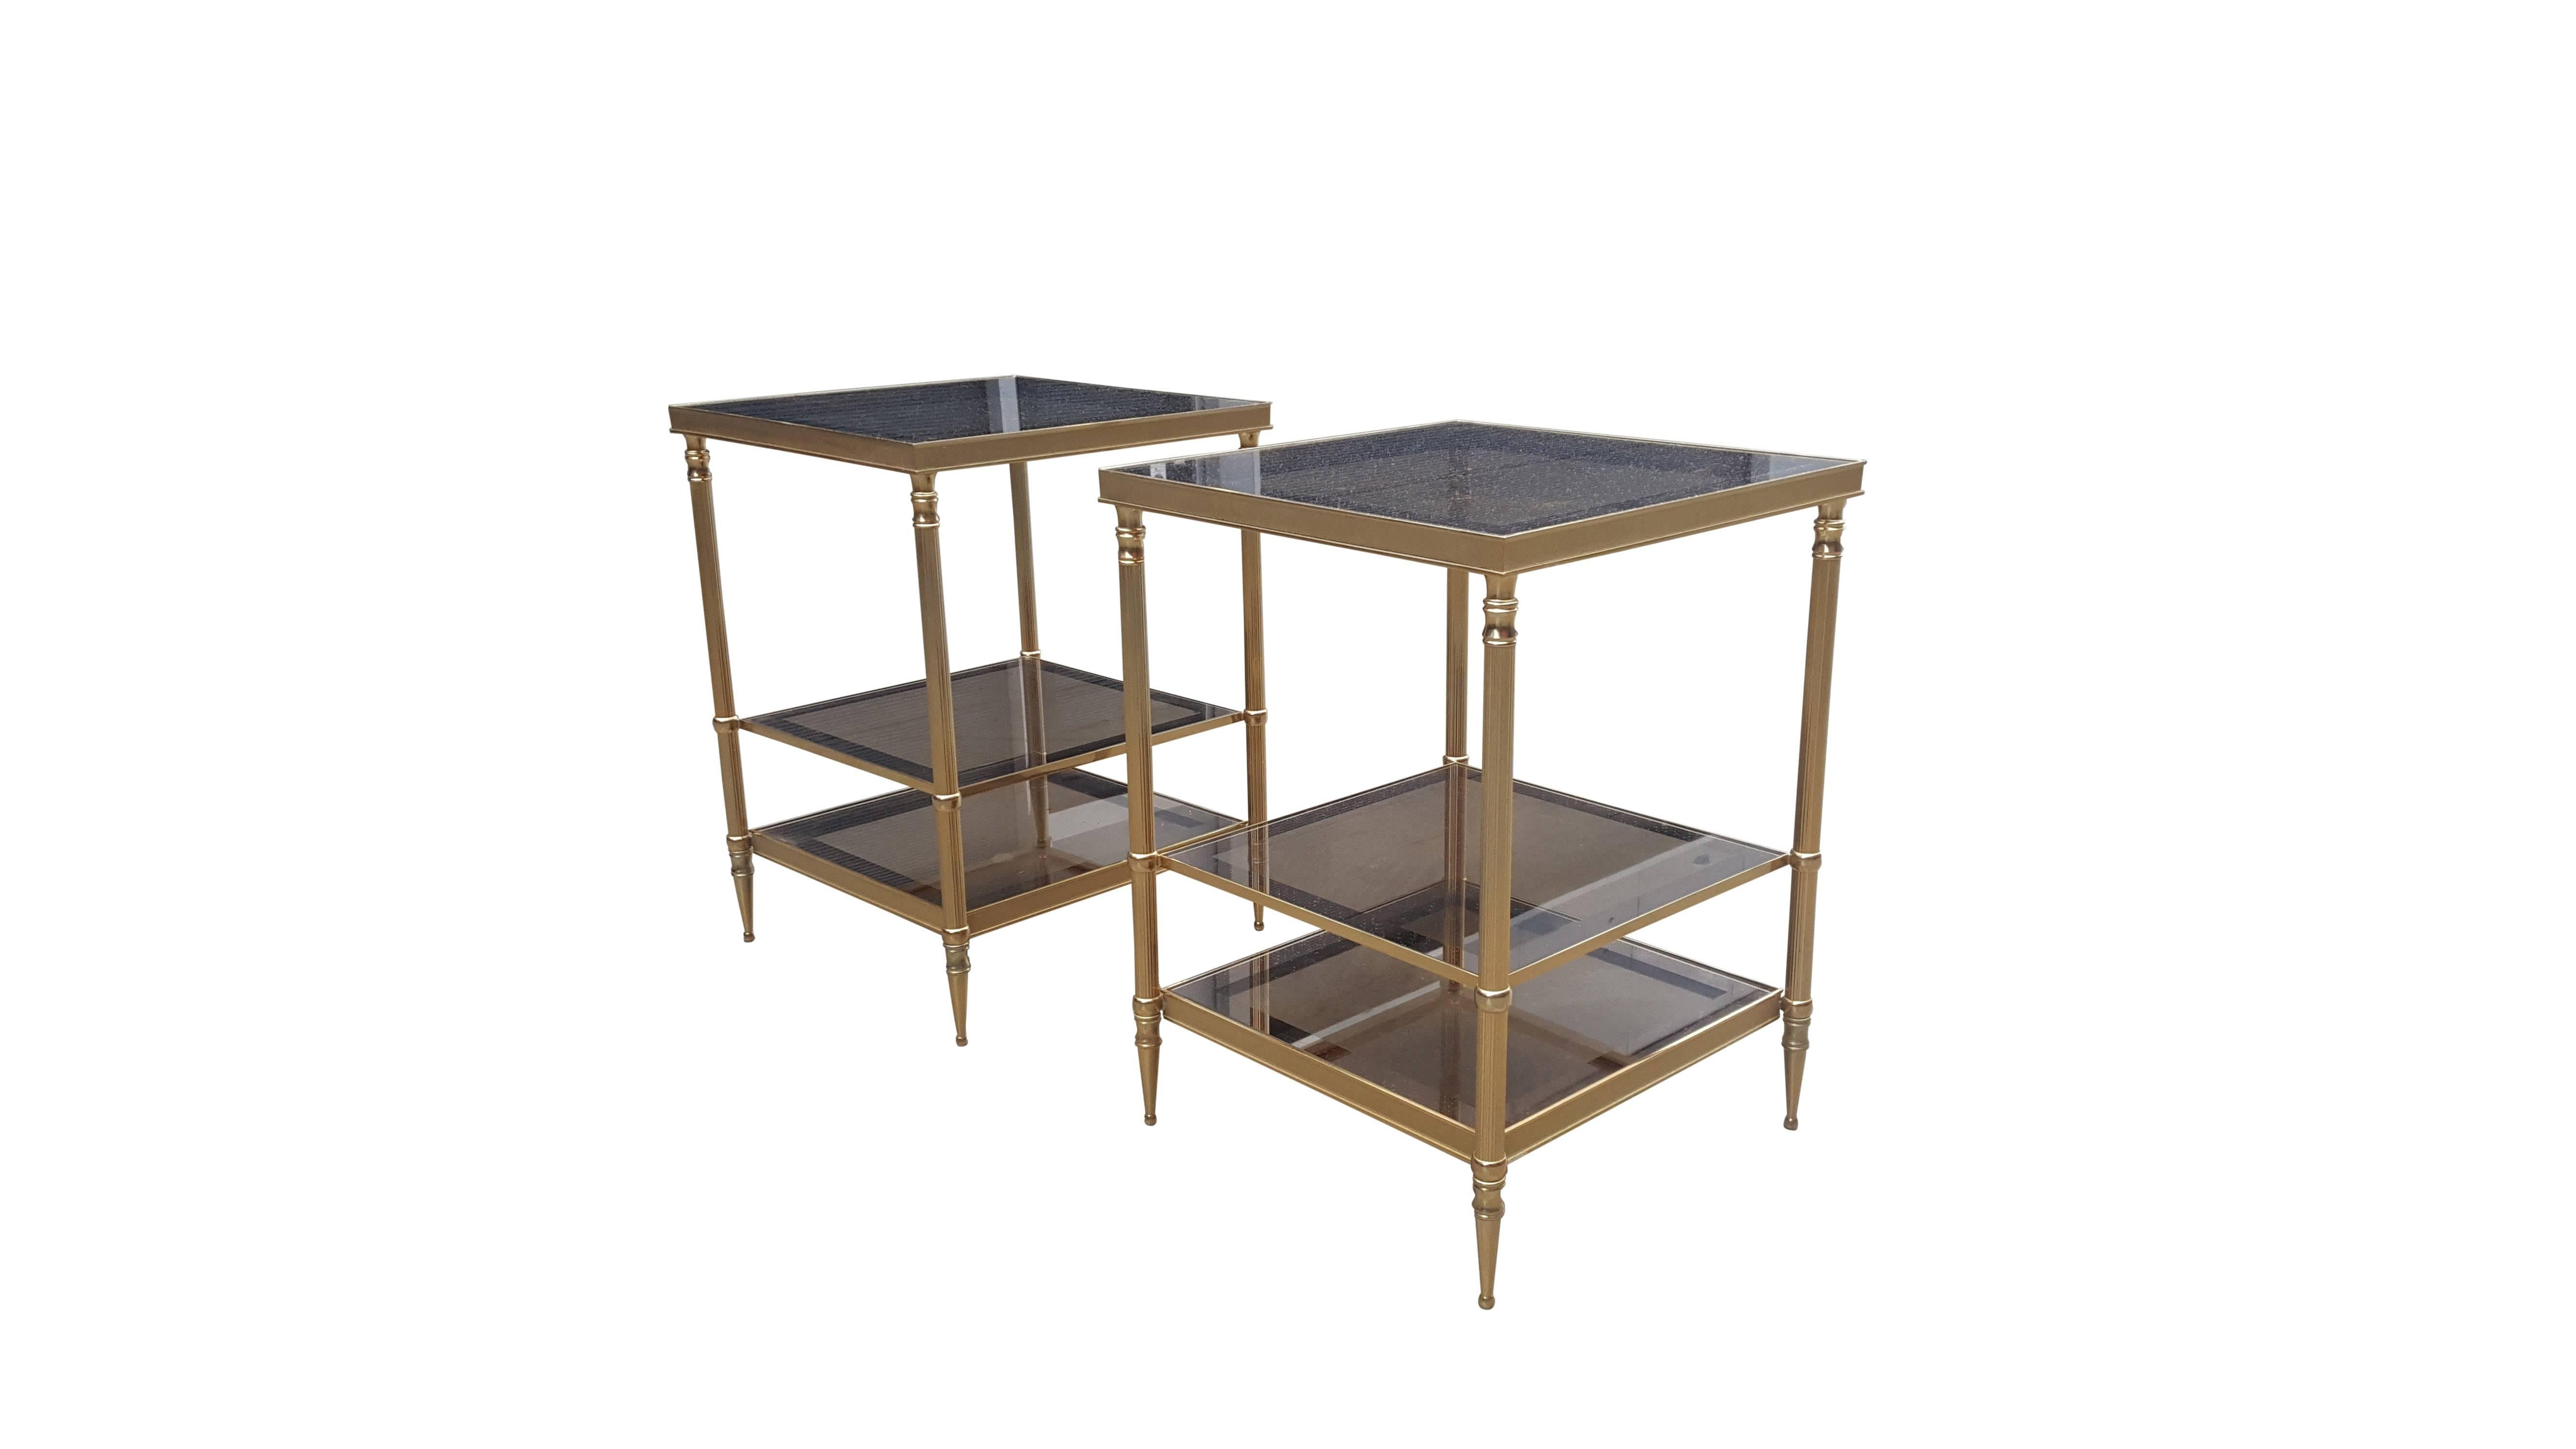 Pair of Mid-Century Modern Maison Jansen side tables, 1960s. 
Solid brass three-tiered end tables with glass tops. 
Elegant and functional design! 
In original condition with minor wear consistent with age and use!

Original glass!
 